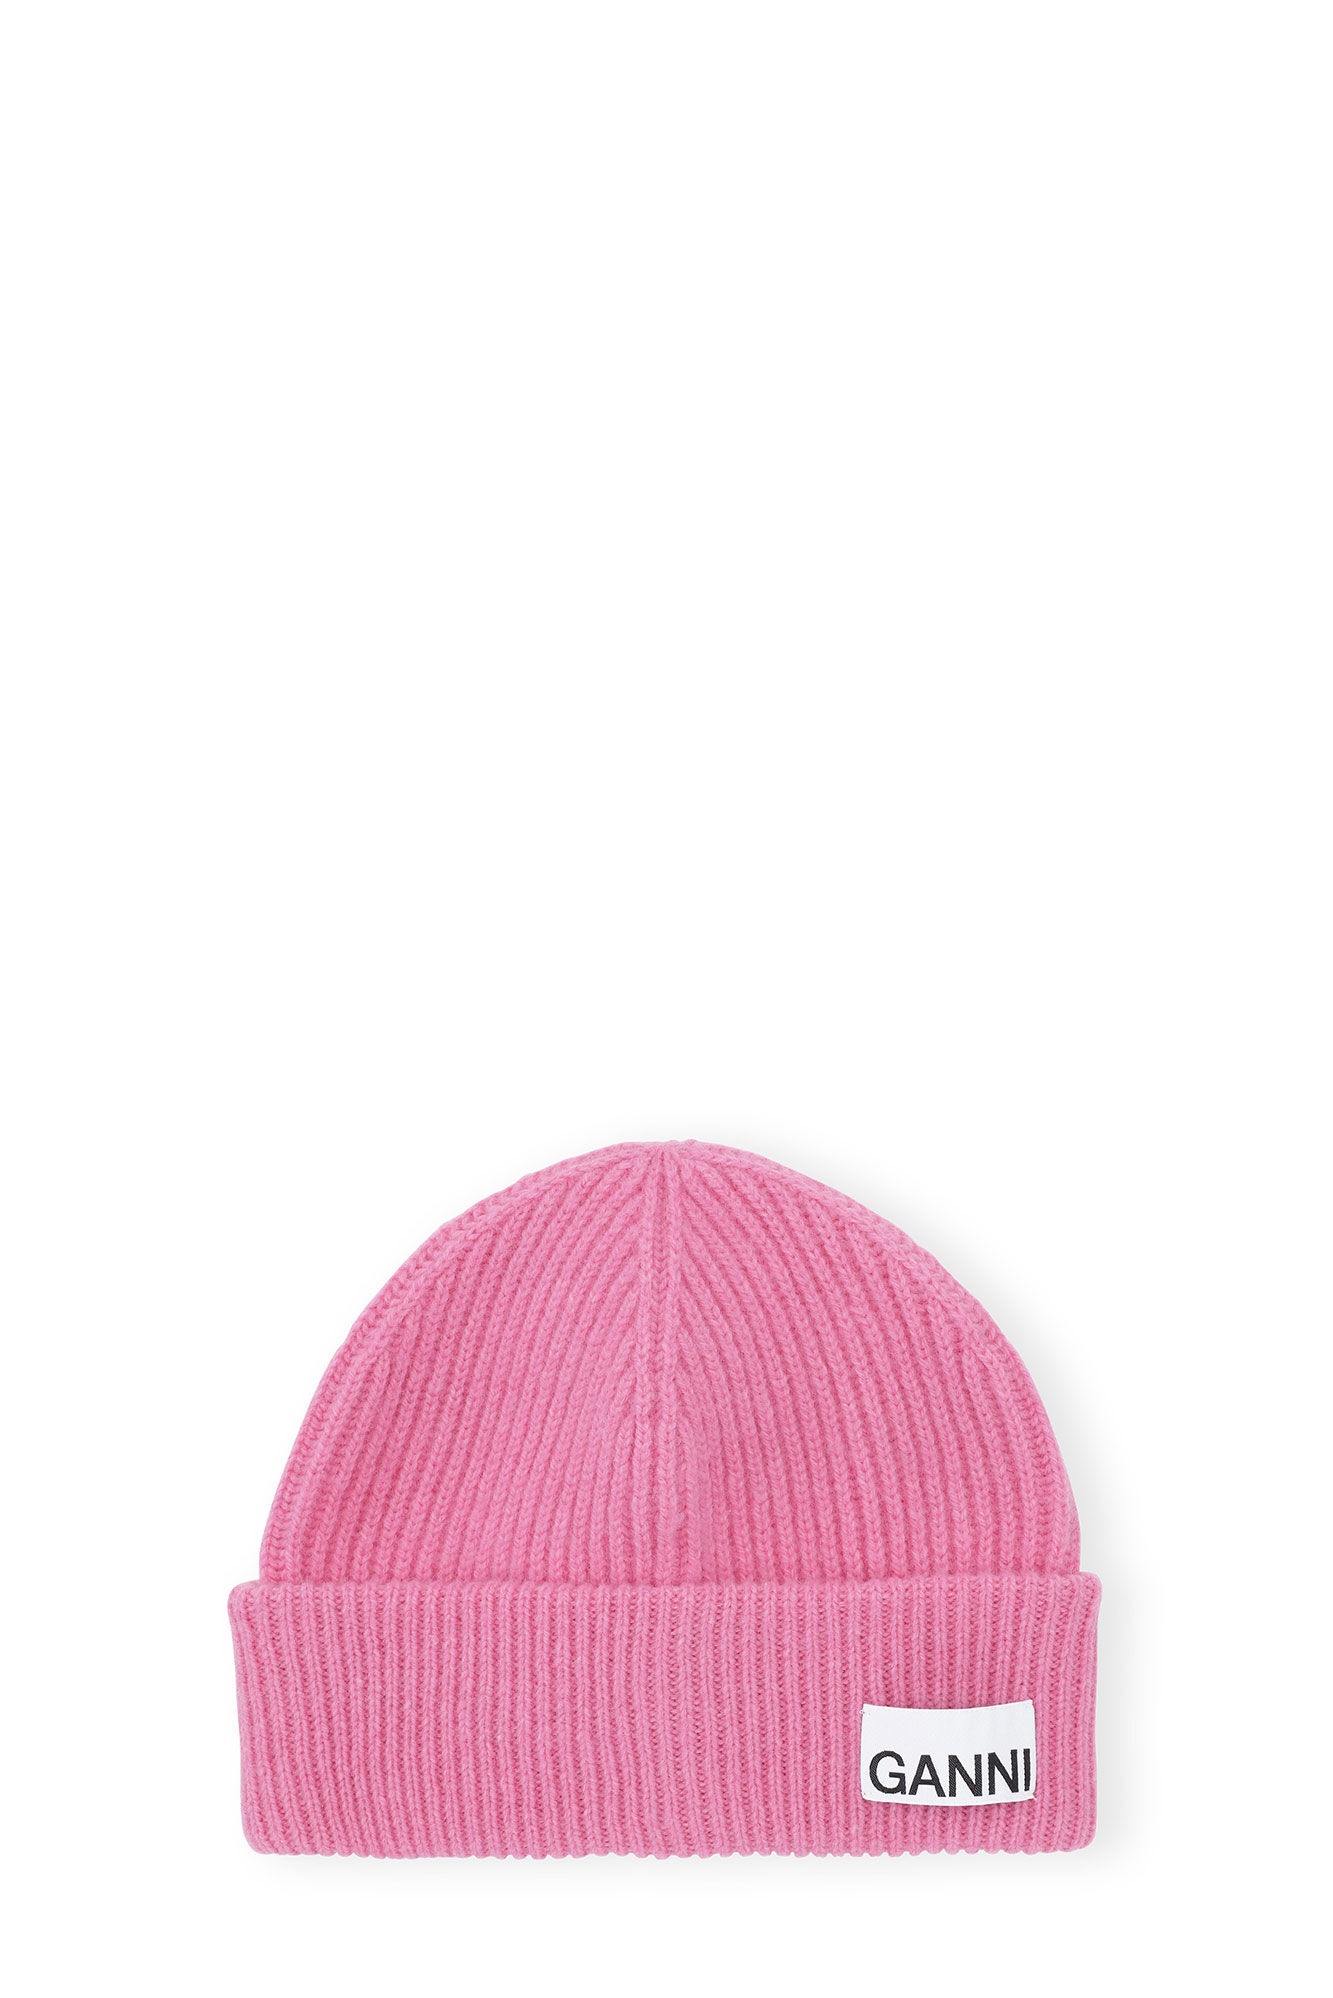 PINK FITTED WOOL RIB KNIT BEANIE - 1